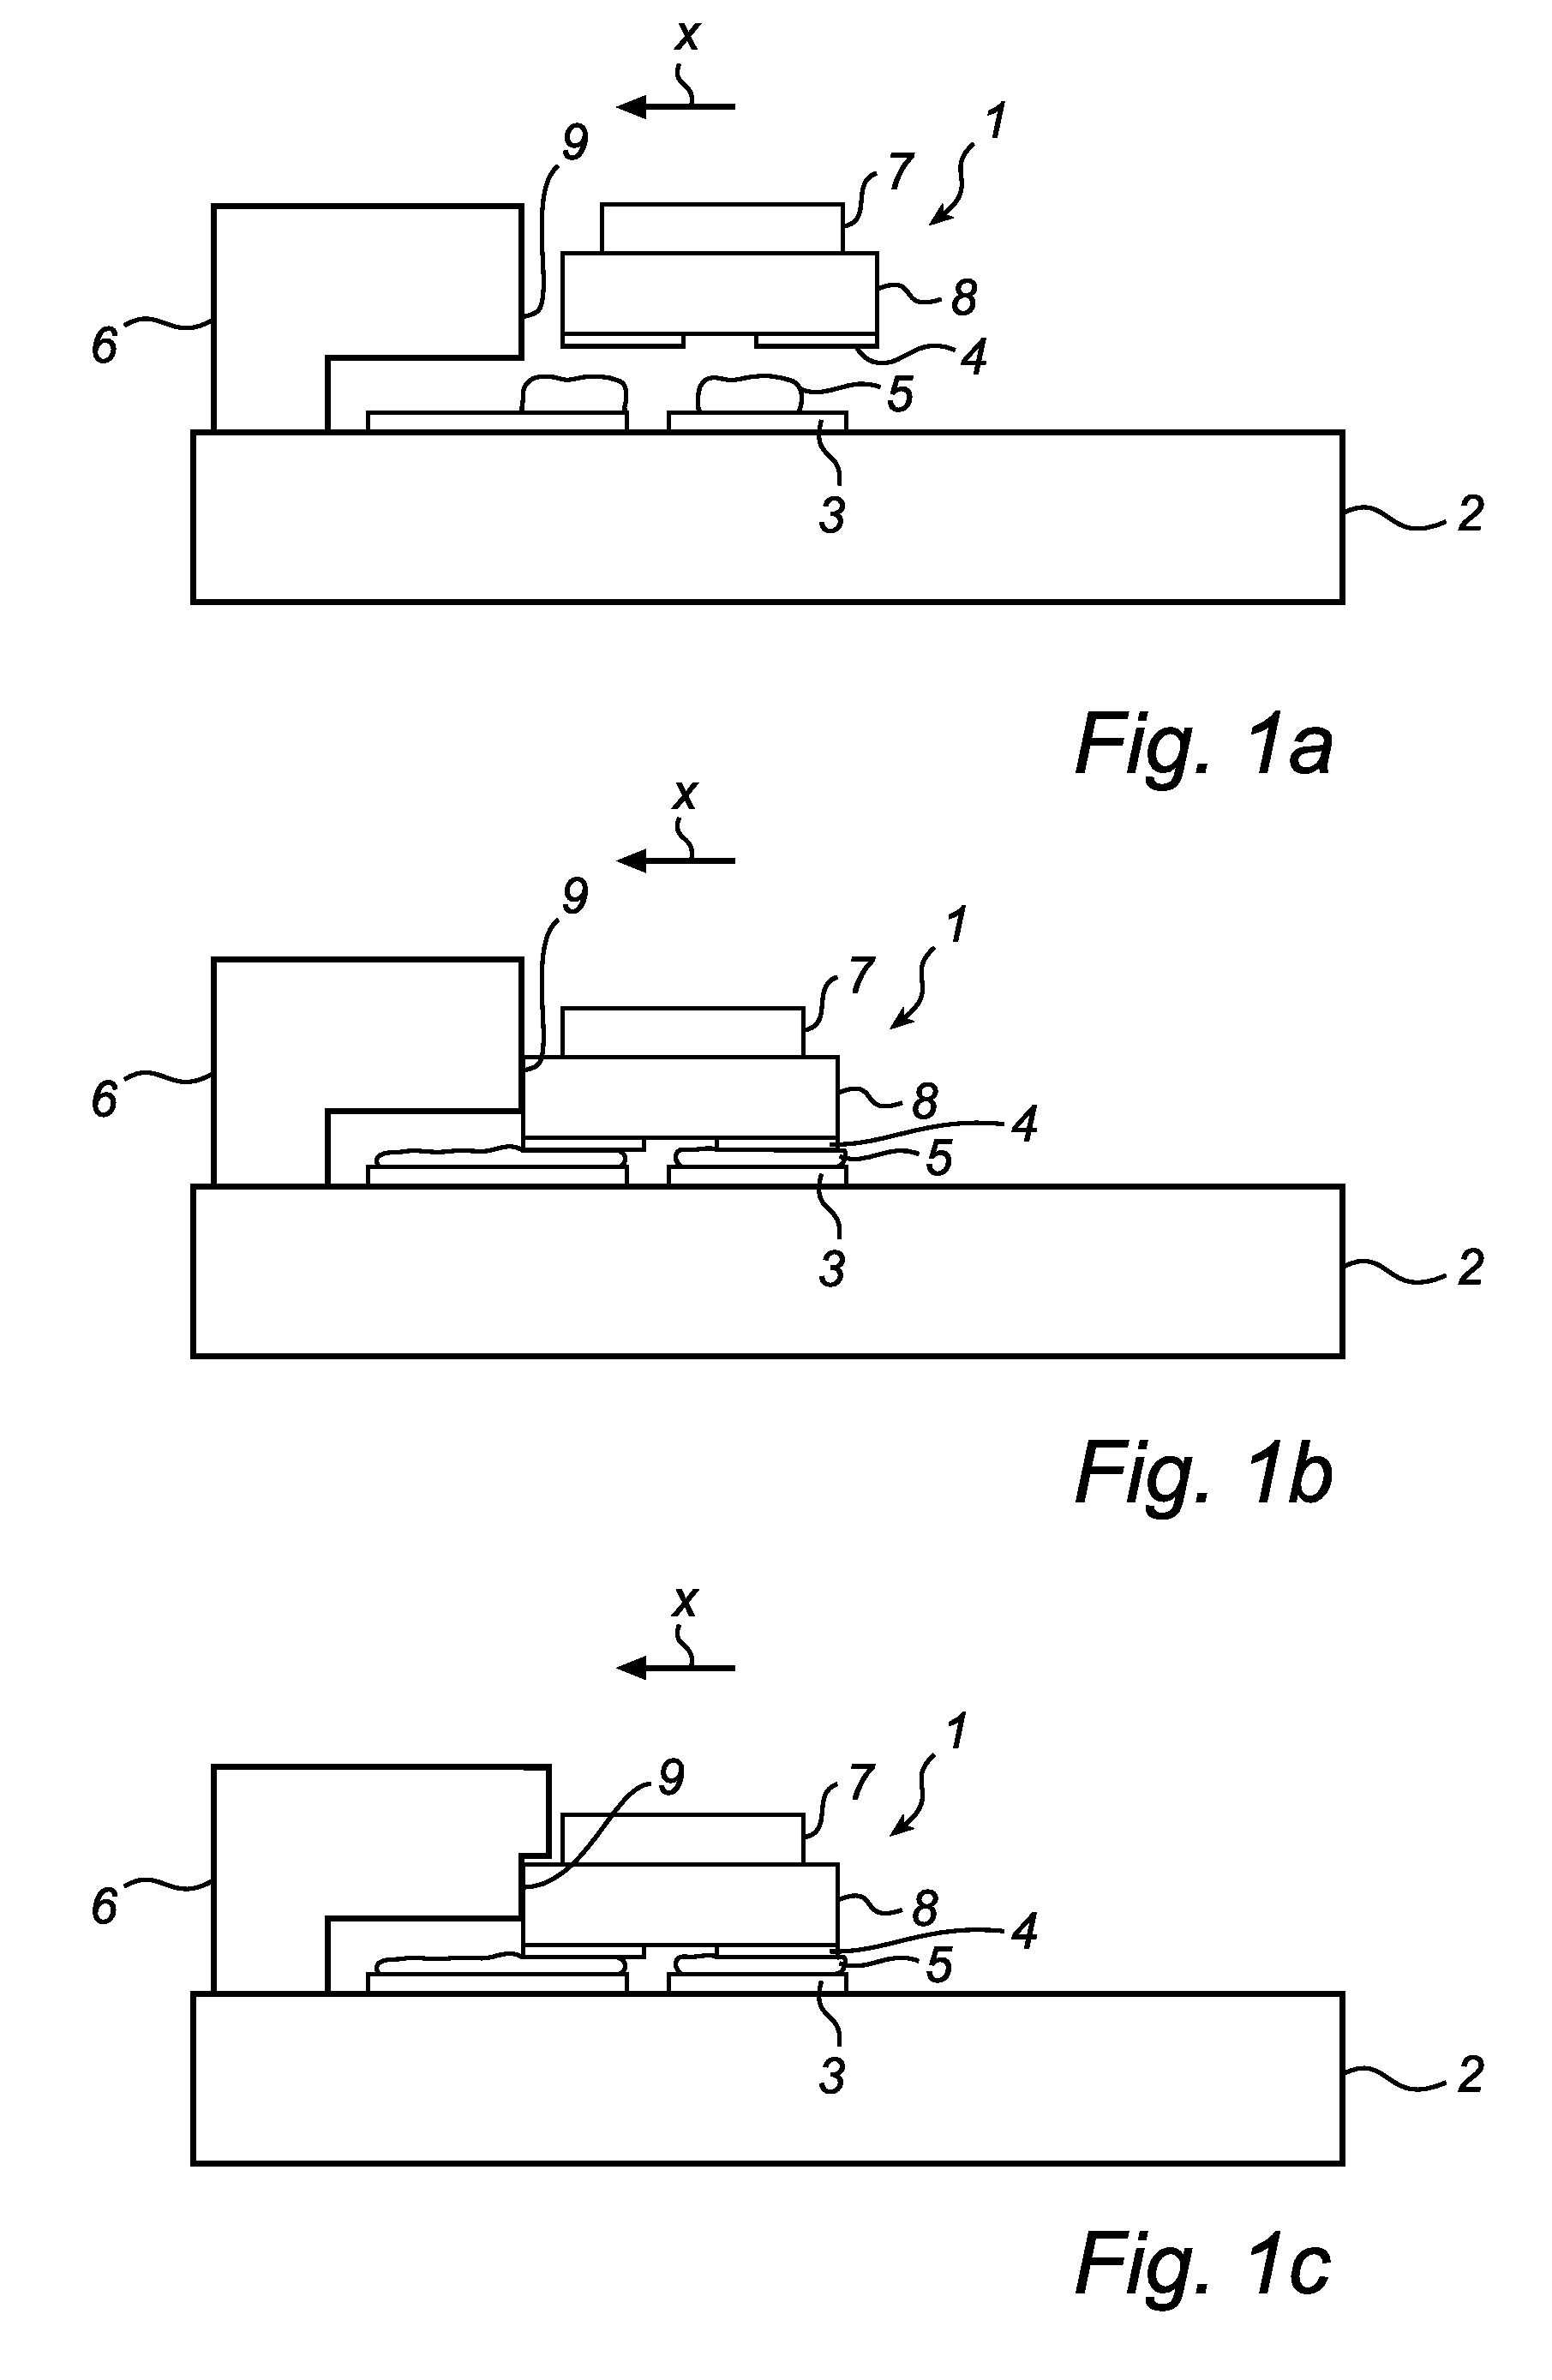 Methods for mounting an electro-optical component in alignment with an optical element and related structures